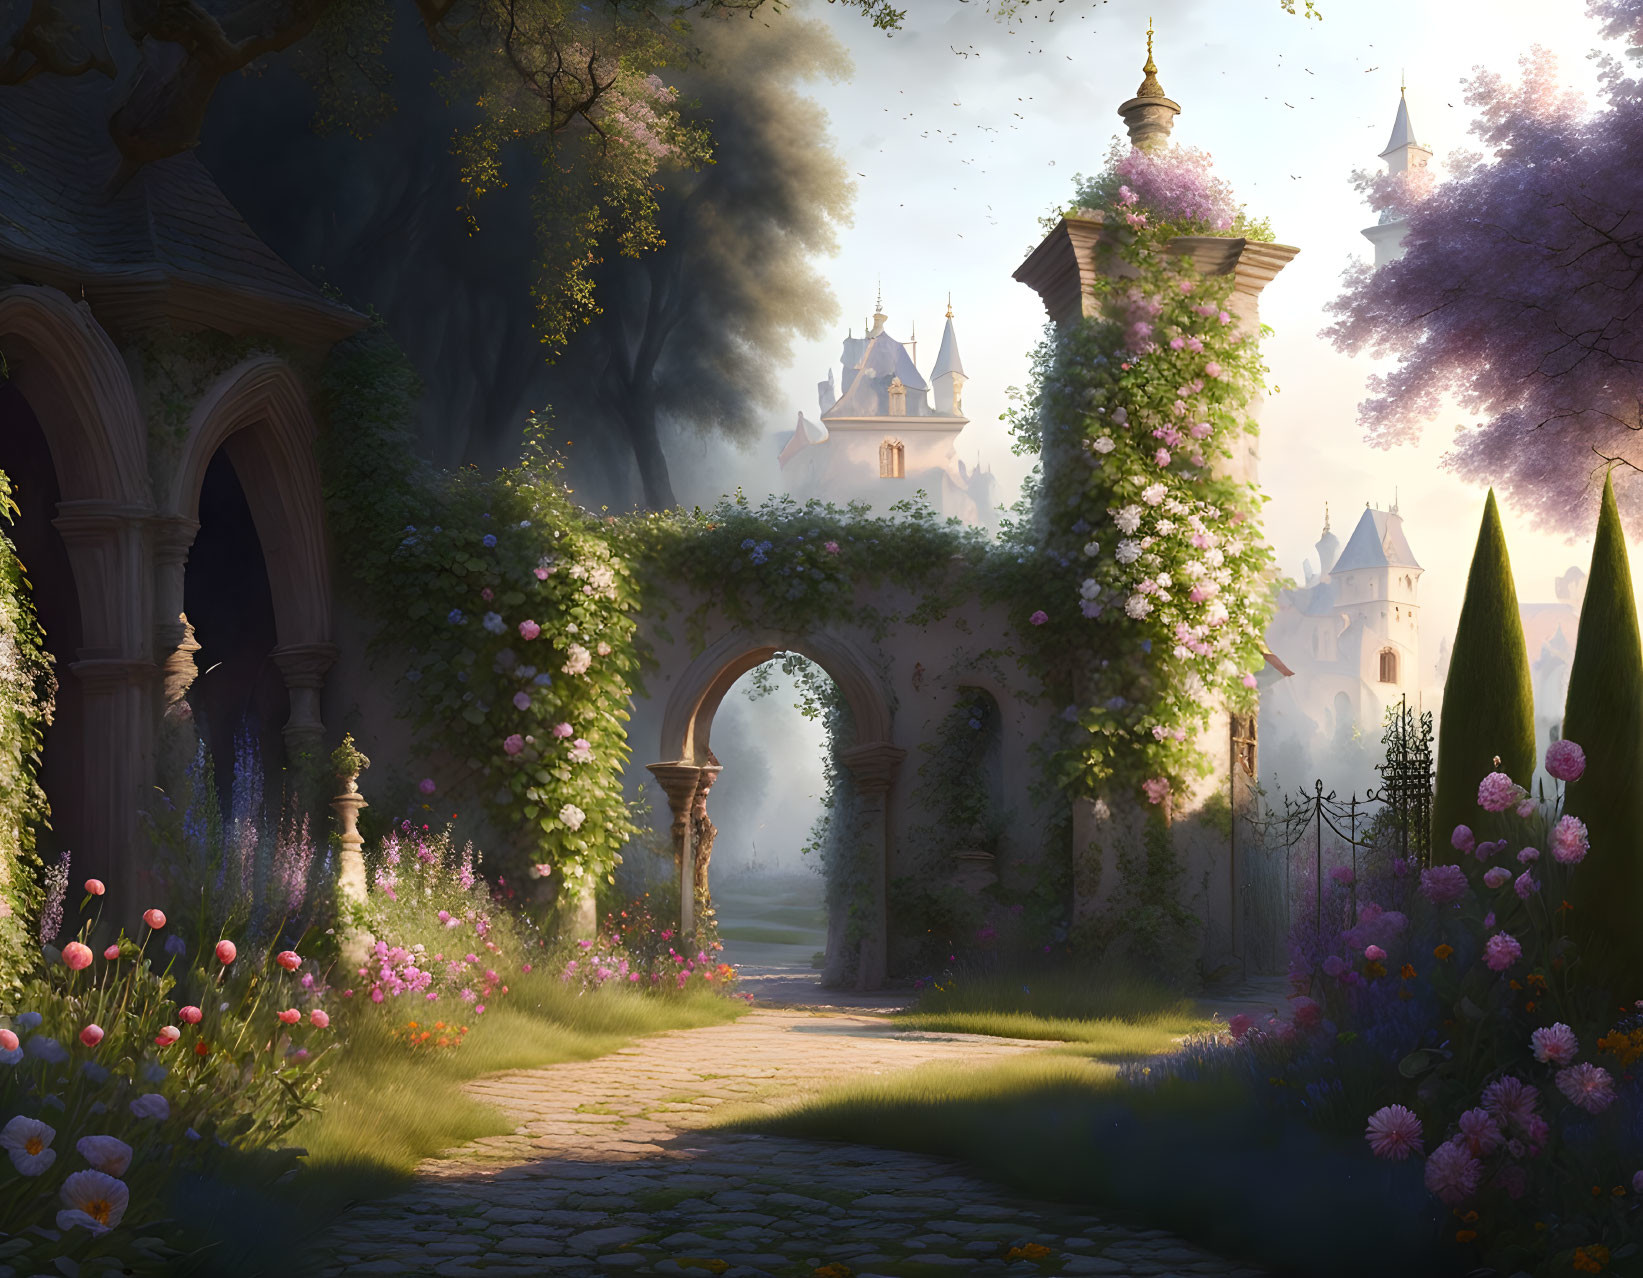 Tranquil fantasy garden path with archway, castle, and lush flora